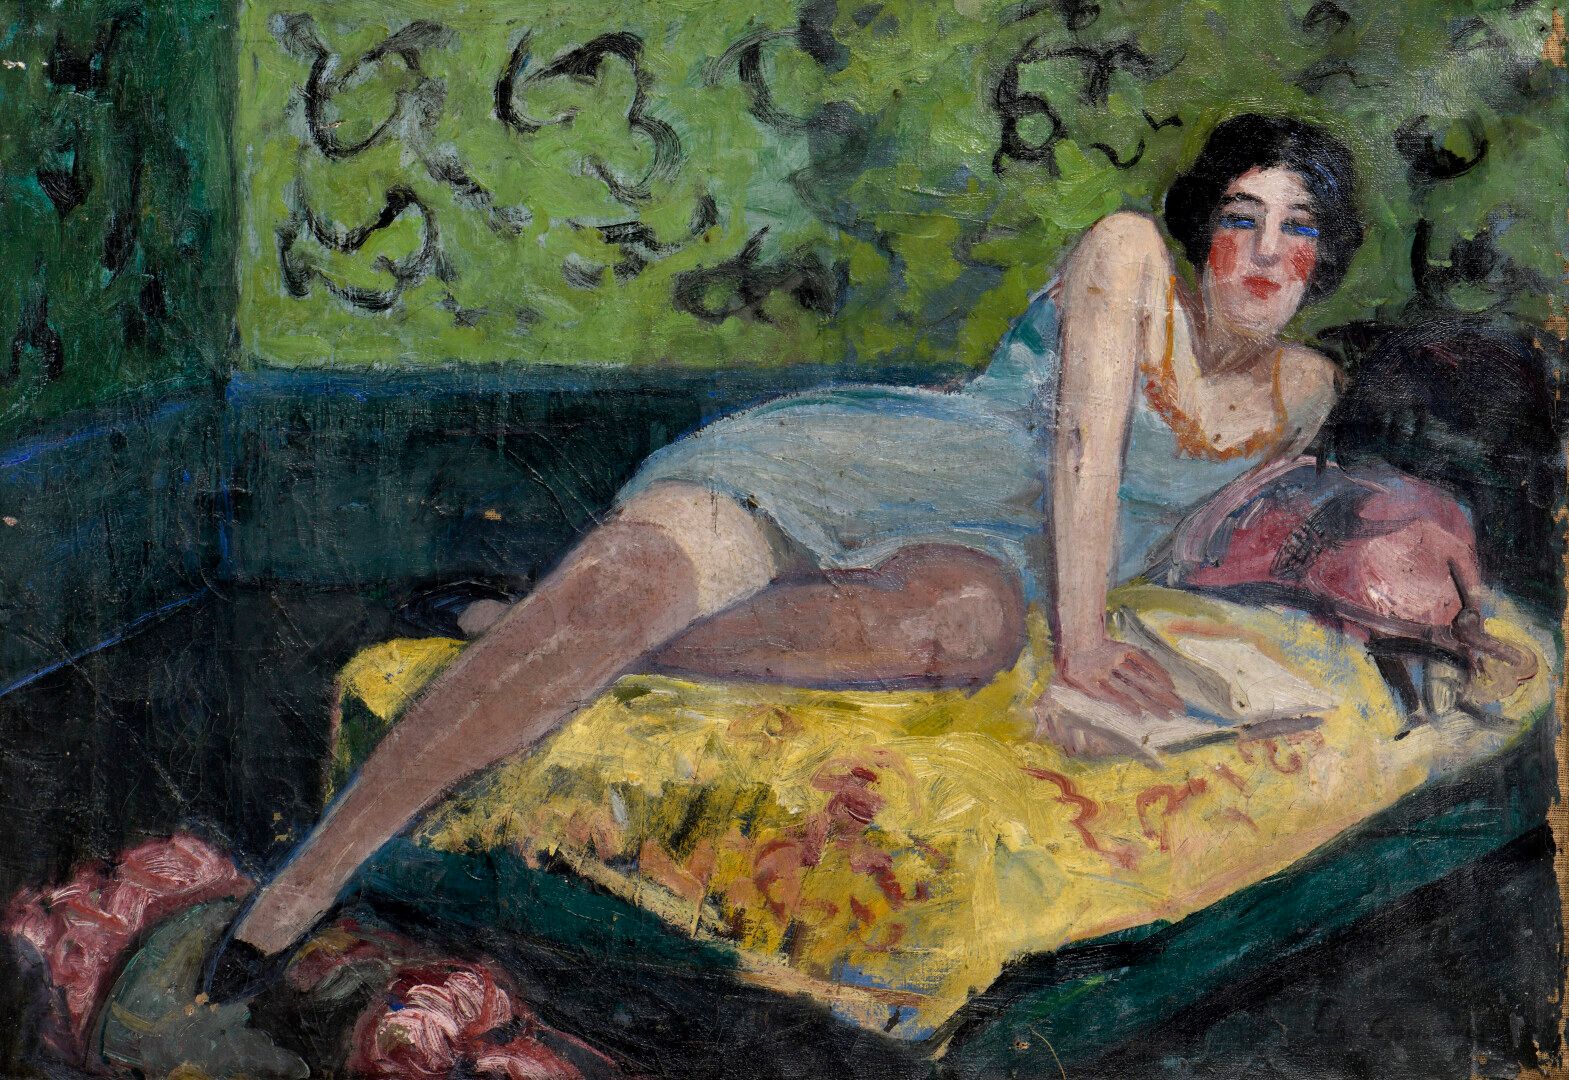 Null Charles CAMOIN (1879-1965). Brown woman lying on a sofa, circa 1912-1913

O&hellip;